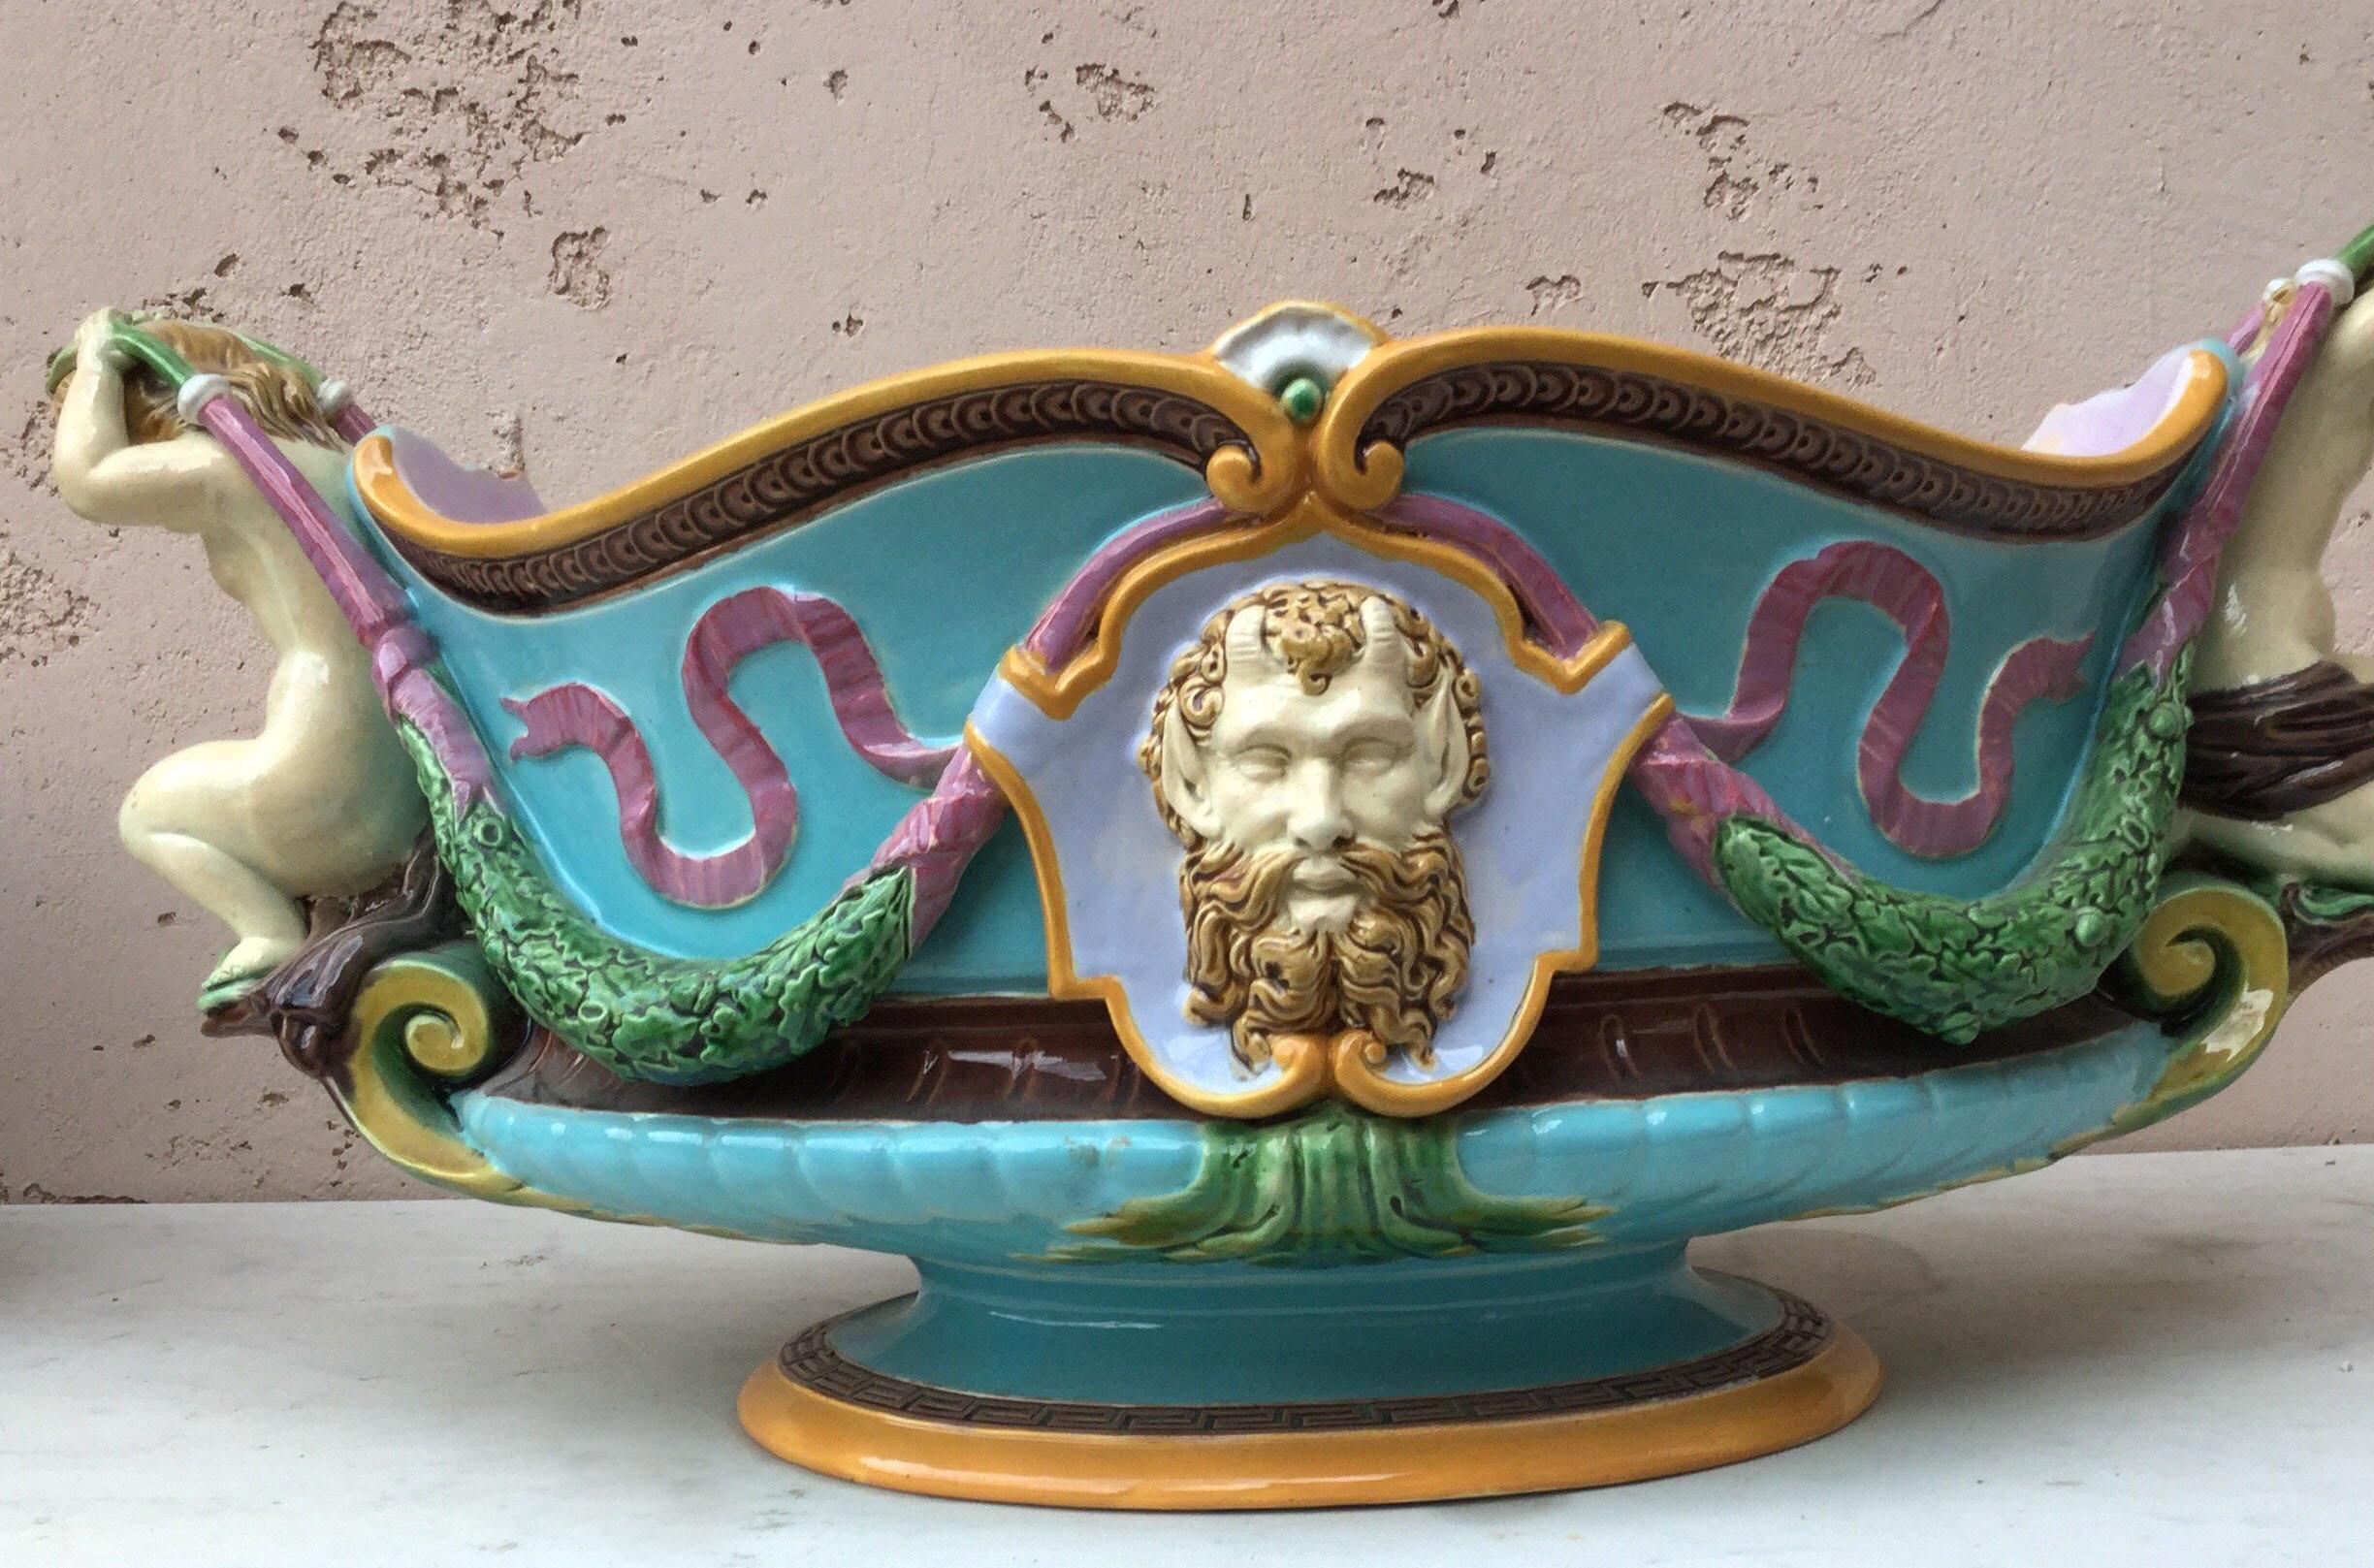 Classical style for this large Majolica jardiniere or table centre signed Minton and dated 1876 cherubs handles and masks on each side of Renaissance Revival. On the middle of 19th century Minton started to produced Majolica highly inspired by the